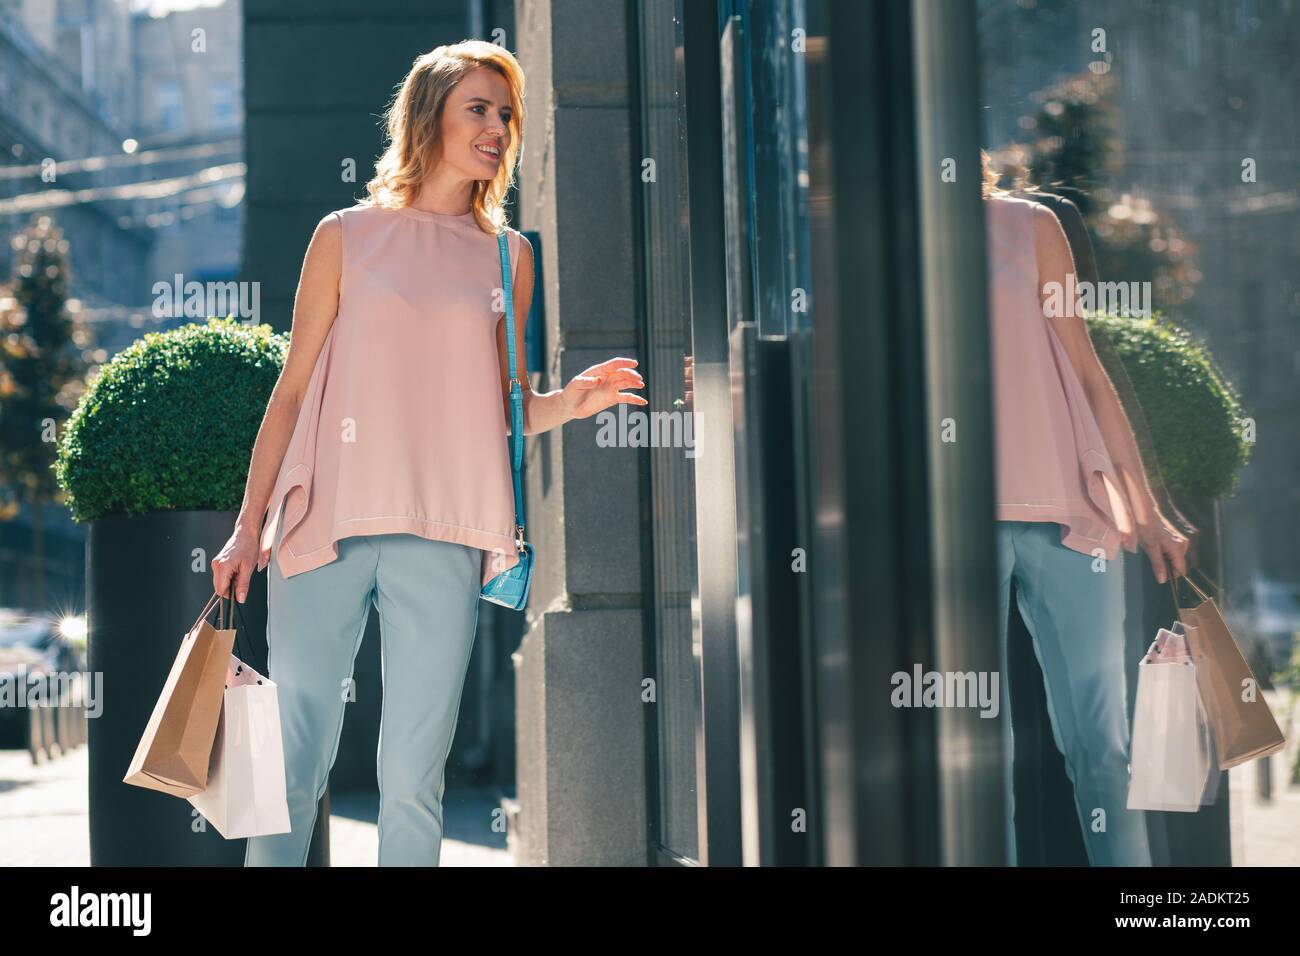 Young adult woman smiling near the glass window Stock Photo